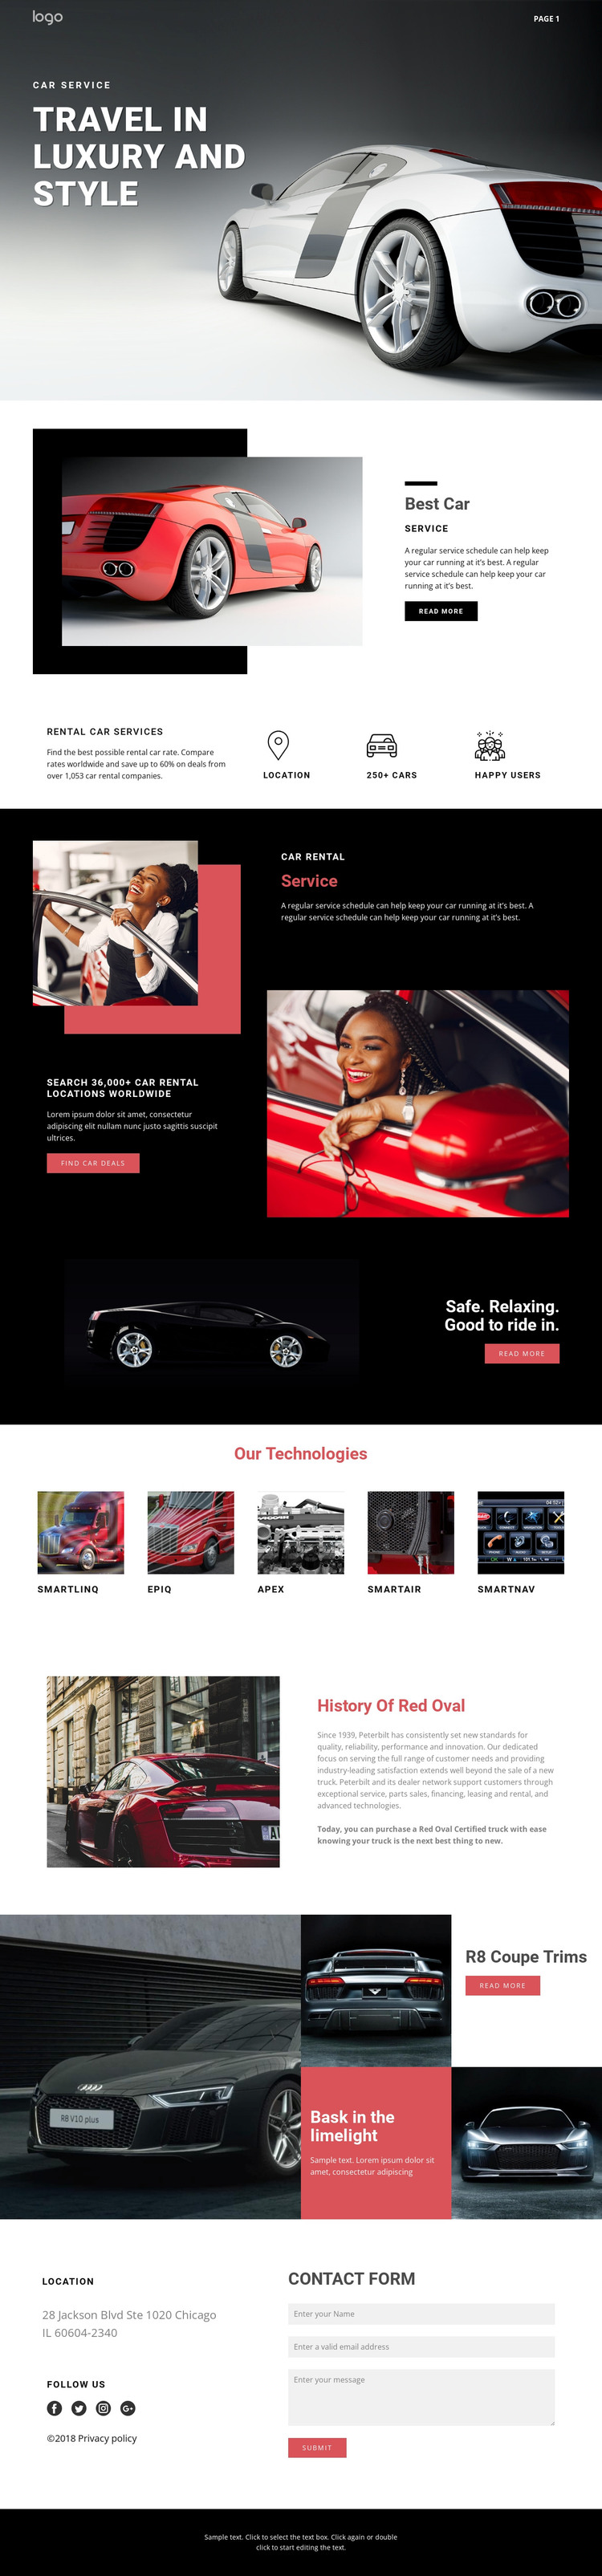 Traveling in luxury cars Web Design